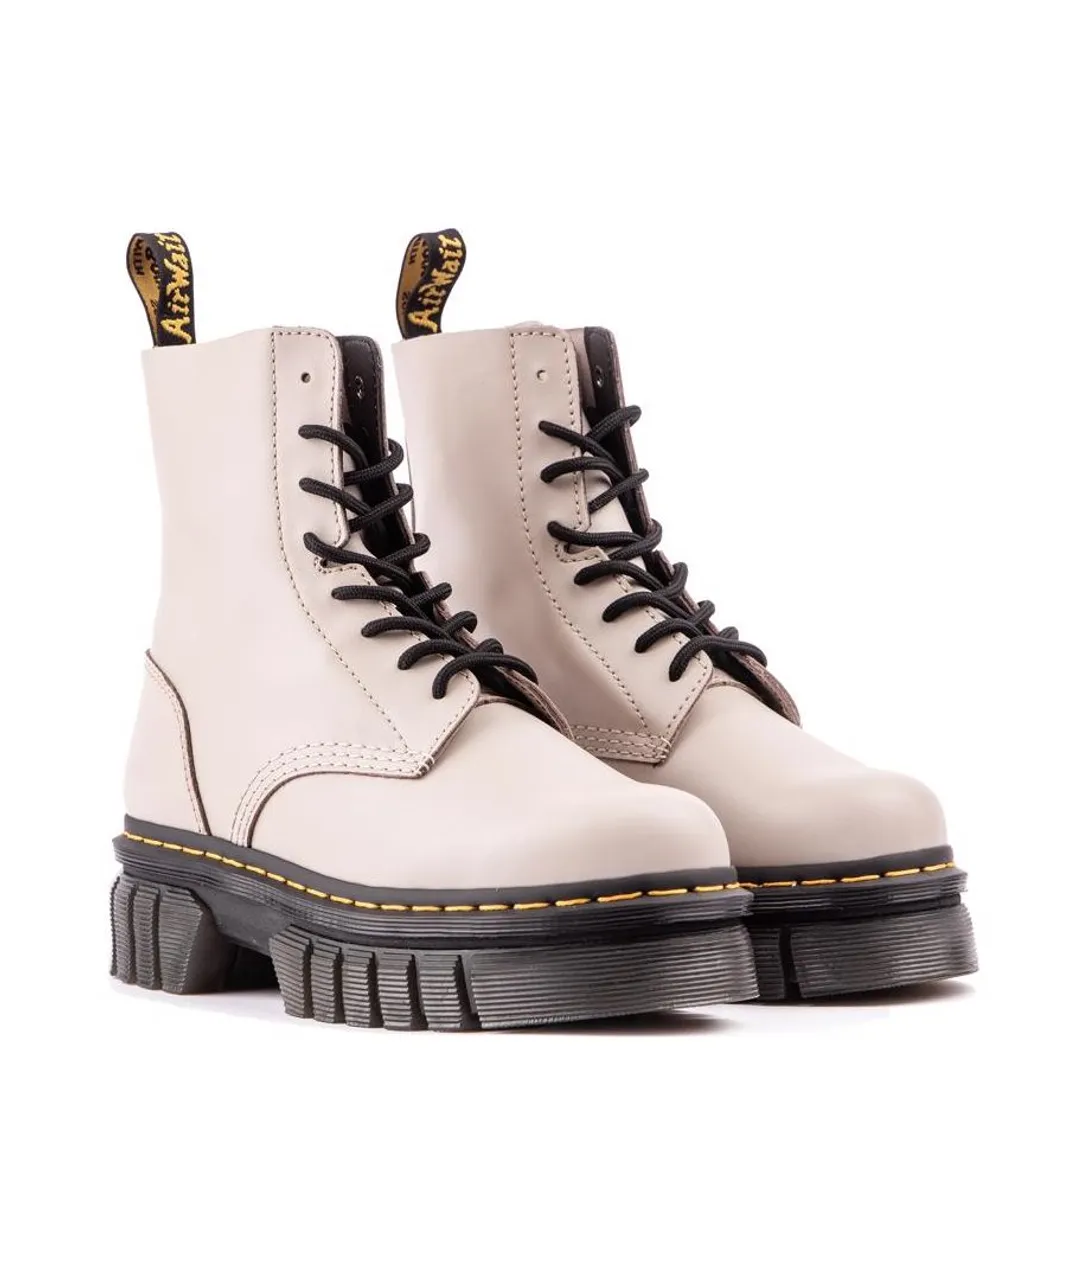 Dr Martens Womens Audrick 8 Eyelet Boots - Taupe